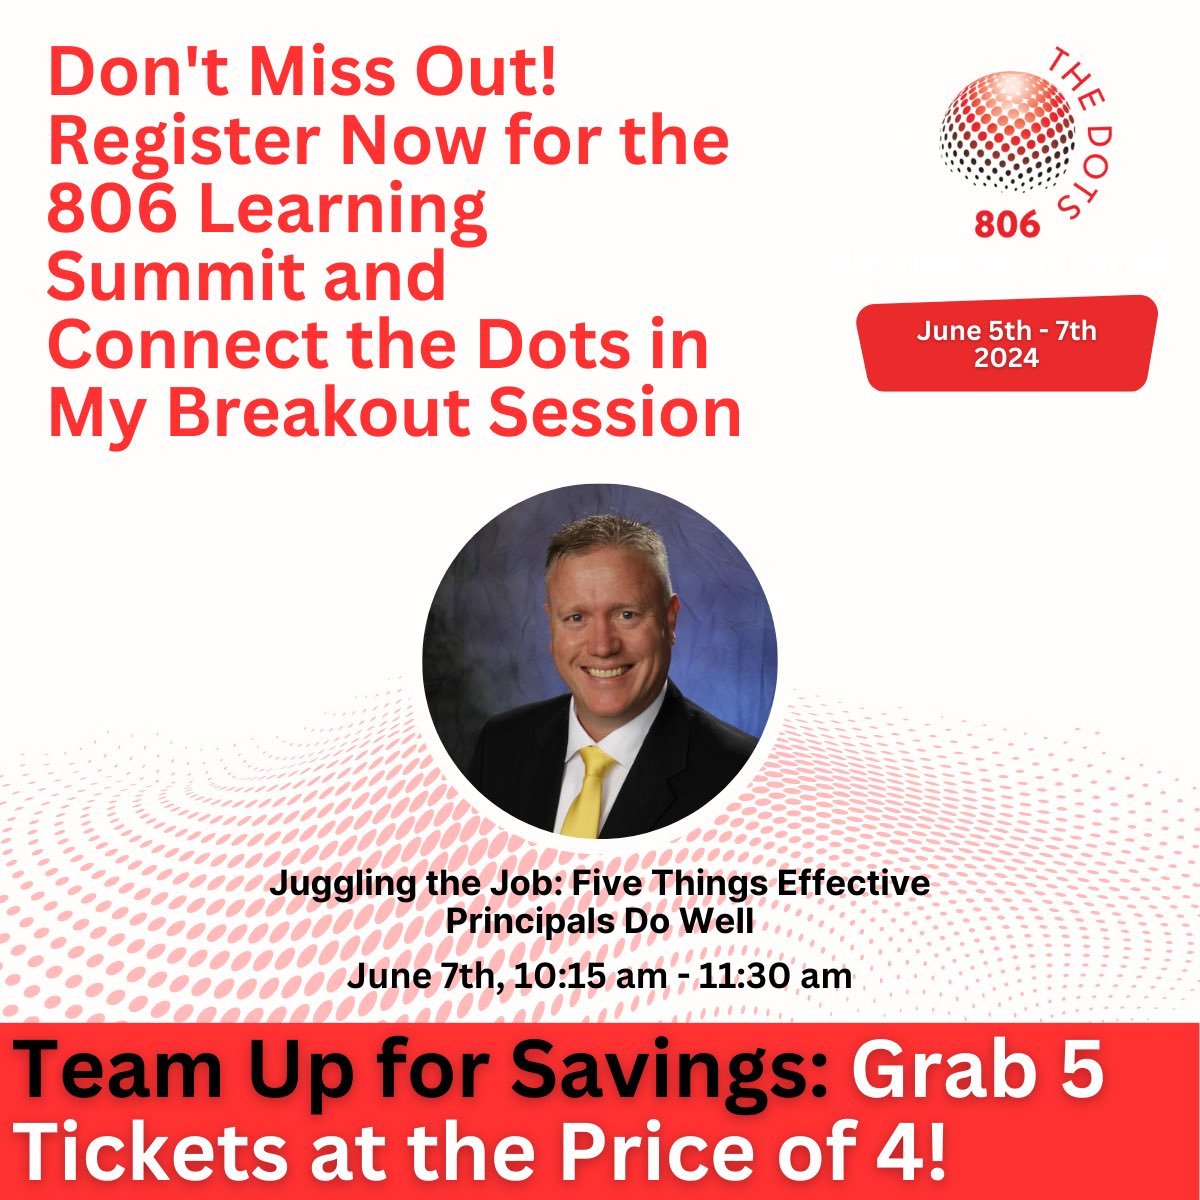 Hope you will join me at the @806Technologies Learning Summit!  We will all be connecting the dots and maybe learning to juggle a few of them! @ModelSchoolsHMH @schoolrubric #bebold